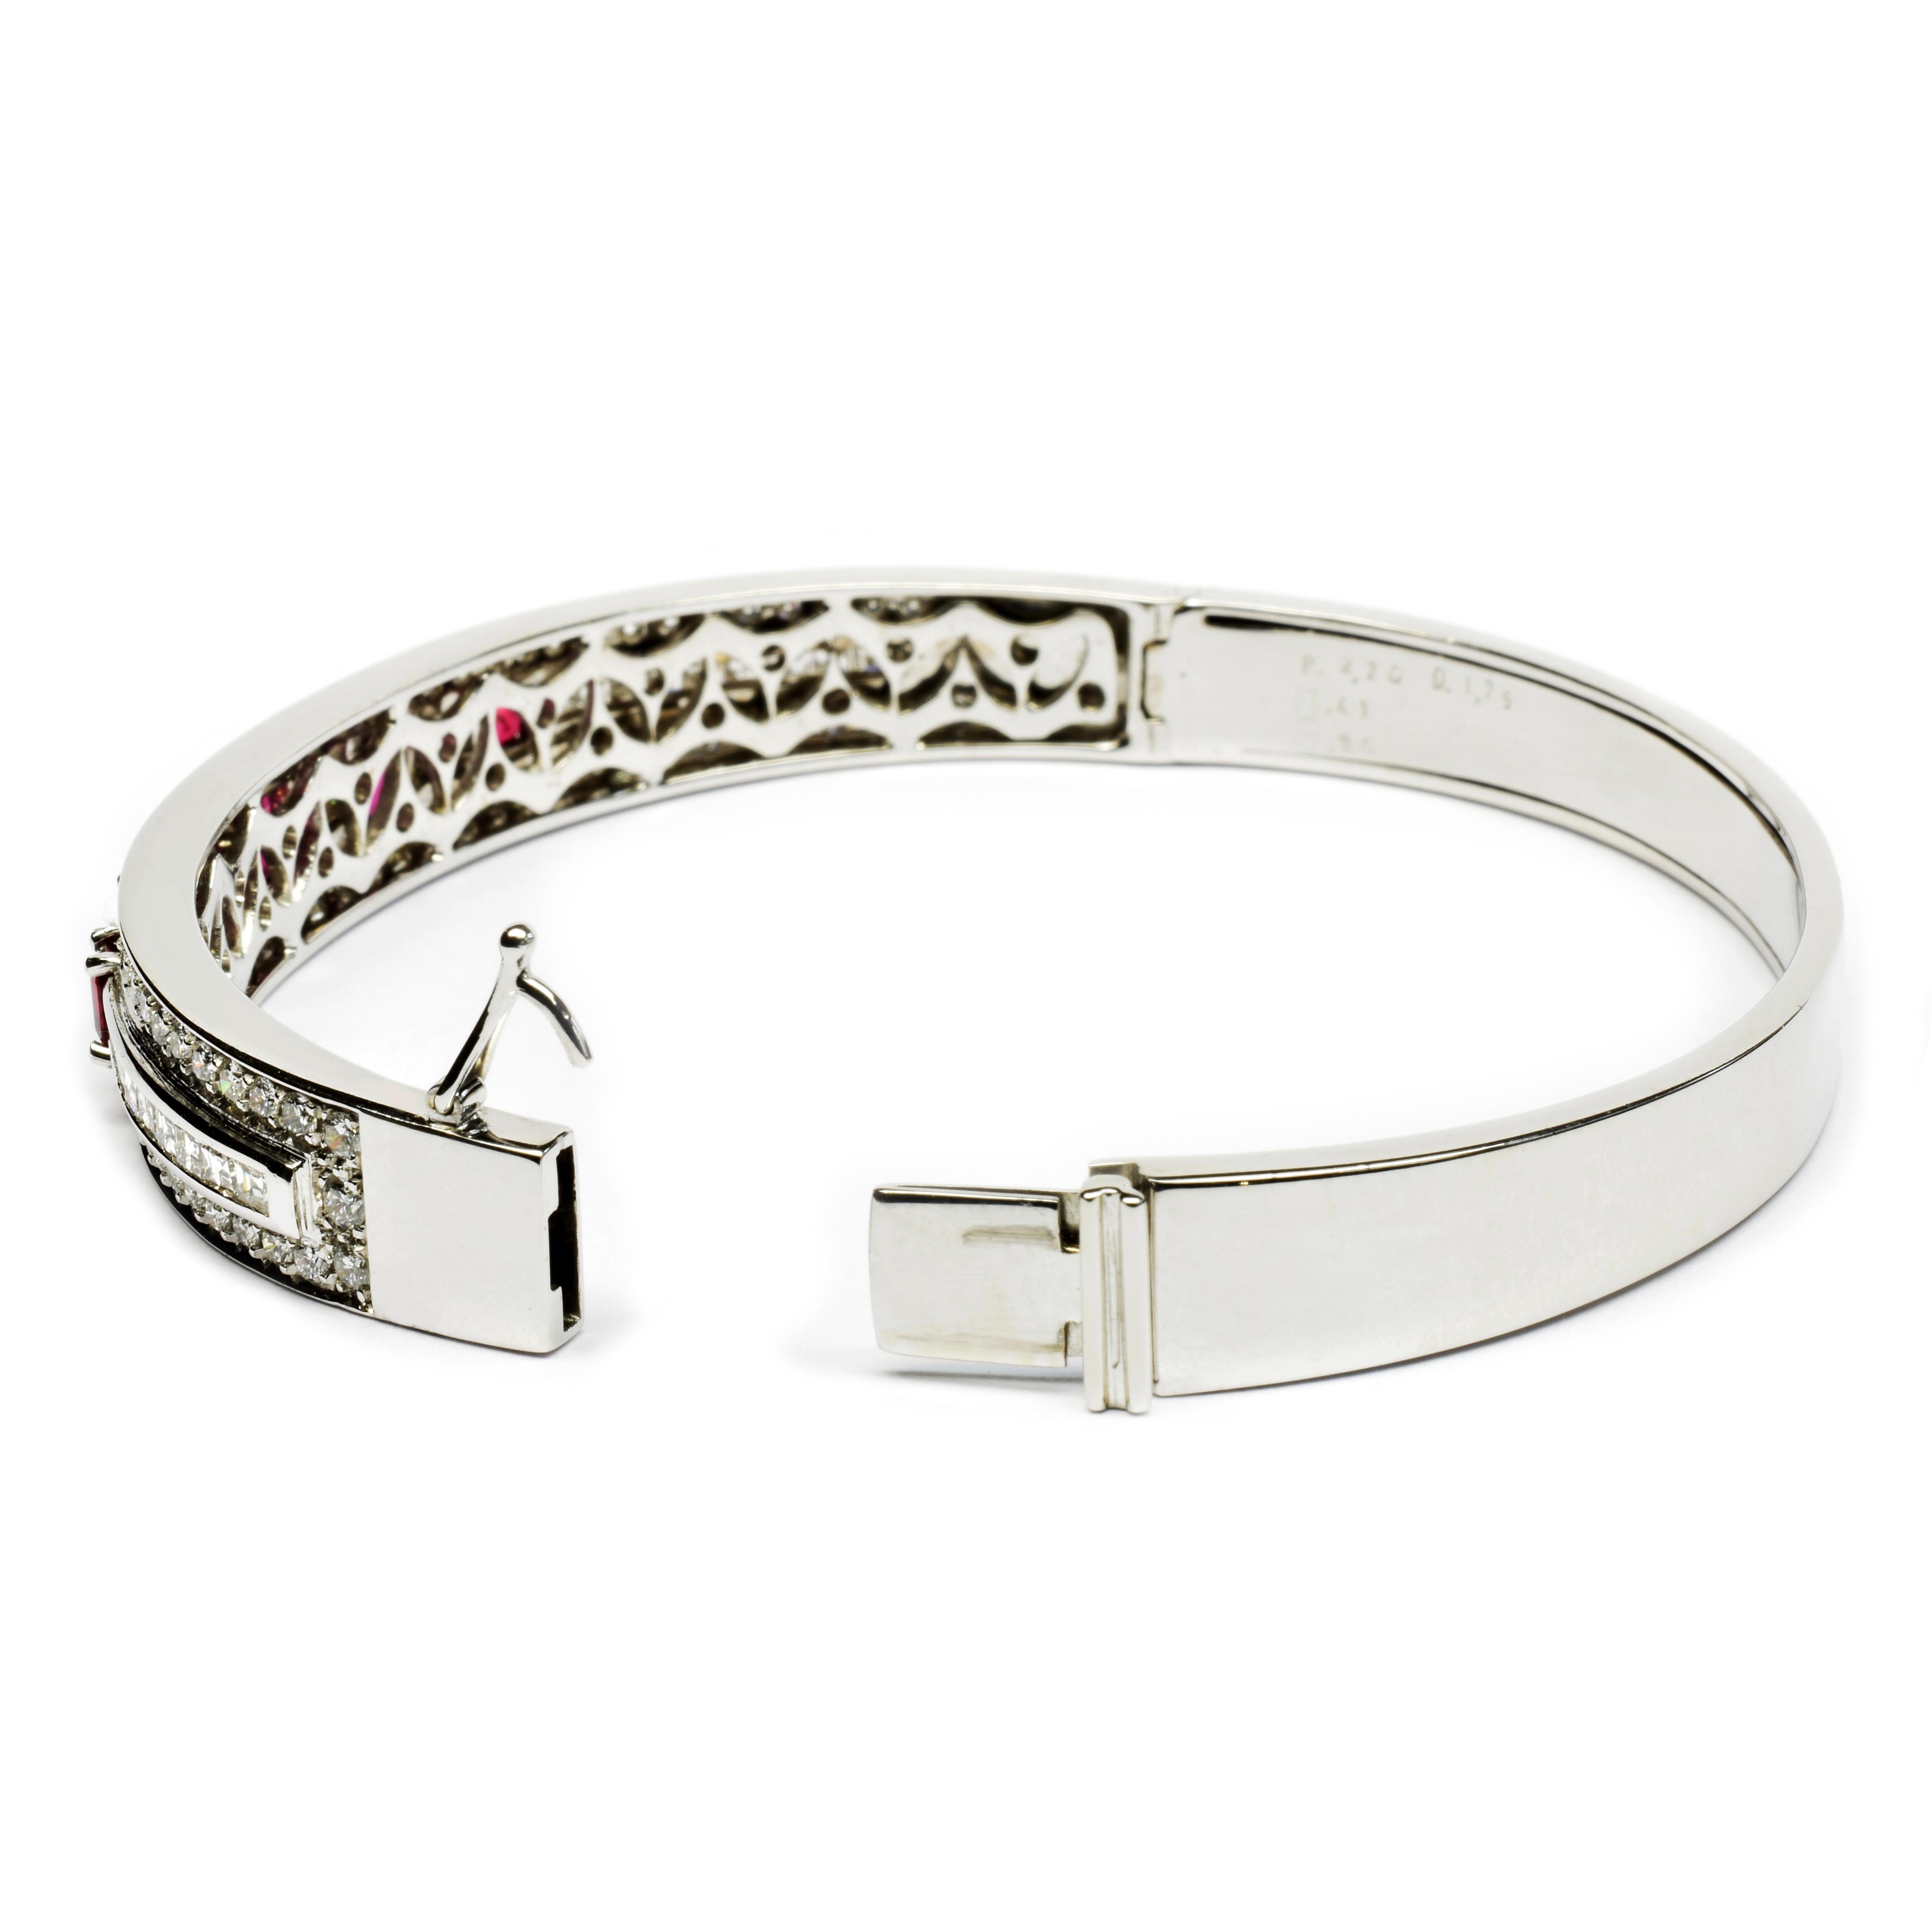 Contemporary Rubies and Diamonds White Gold Bangle Bracelet Made in Italy For Sale